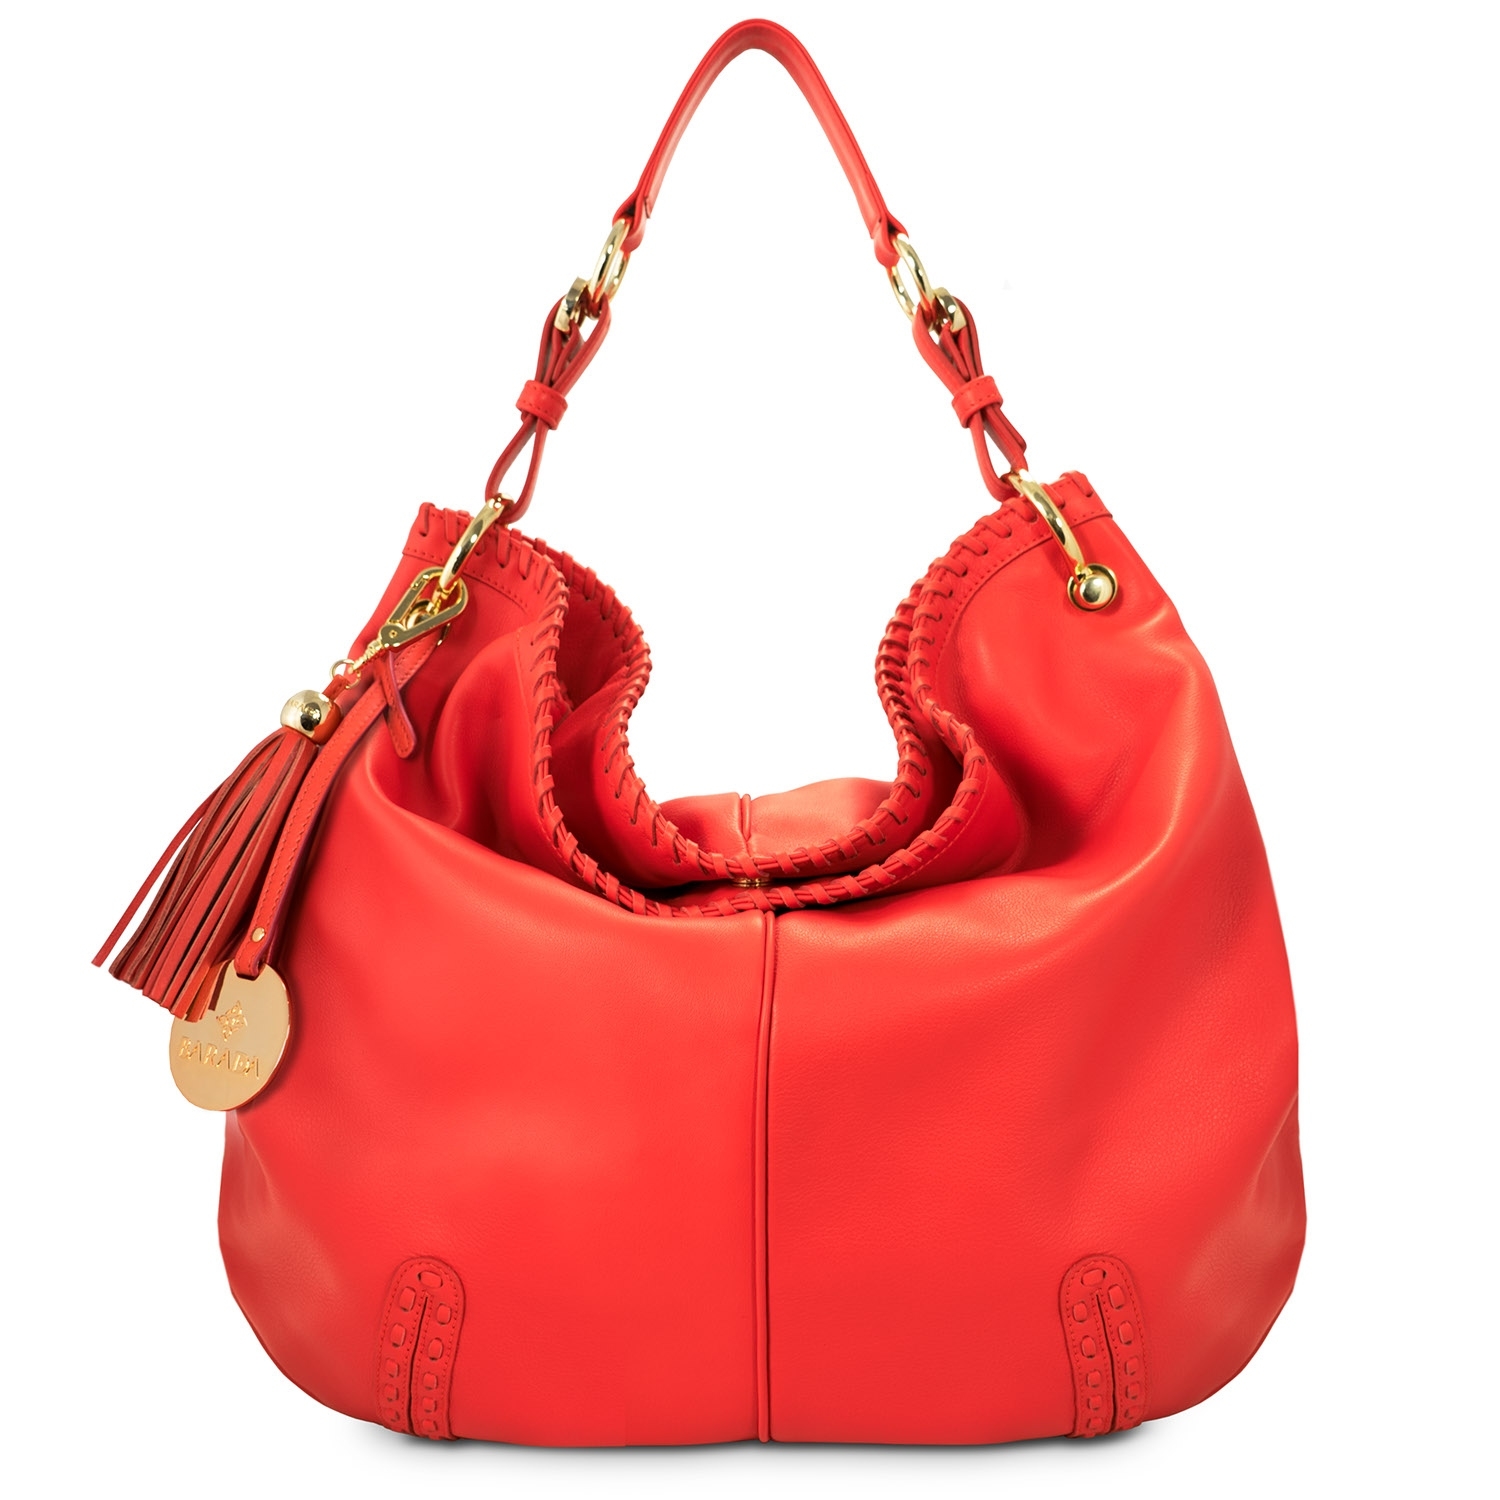 Shoulder bag from Duende collection in Calf leather and Coral color - Barada